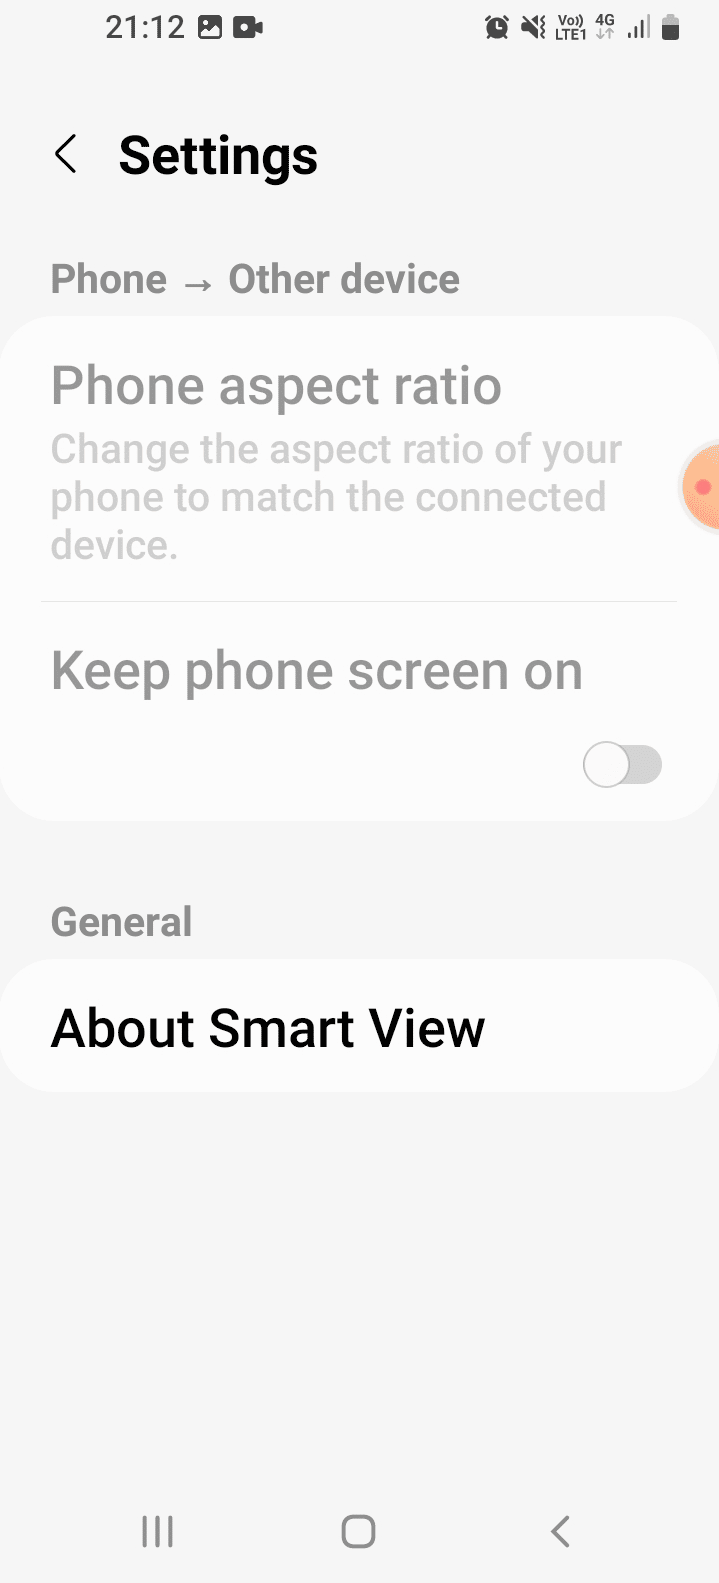 tap on the Phone aspect ratio option